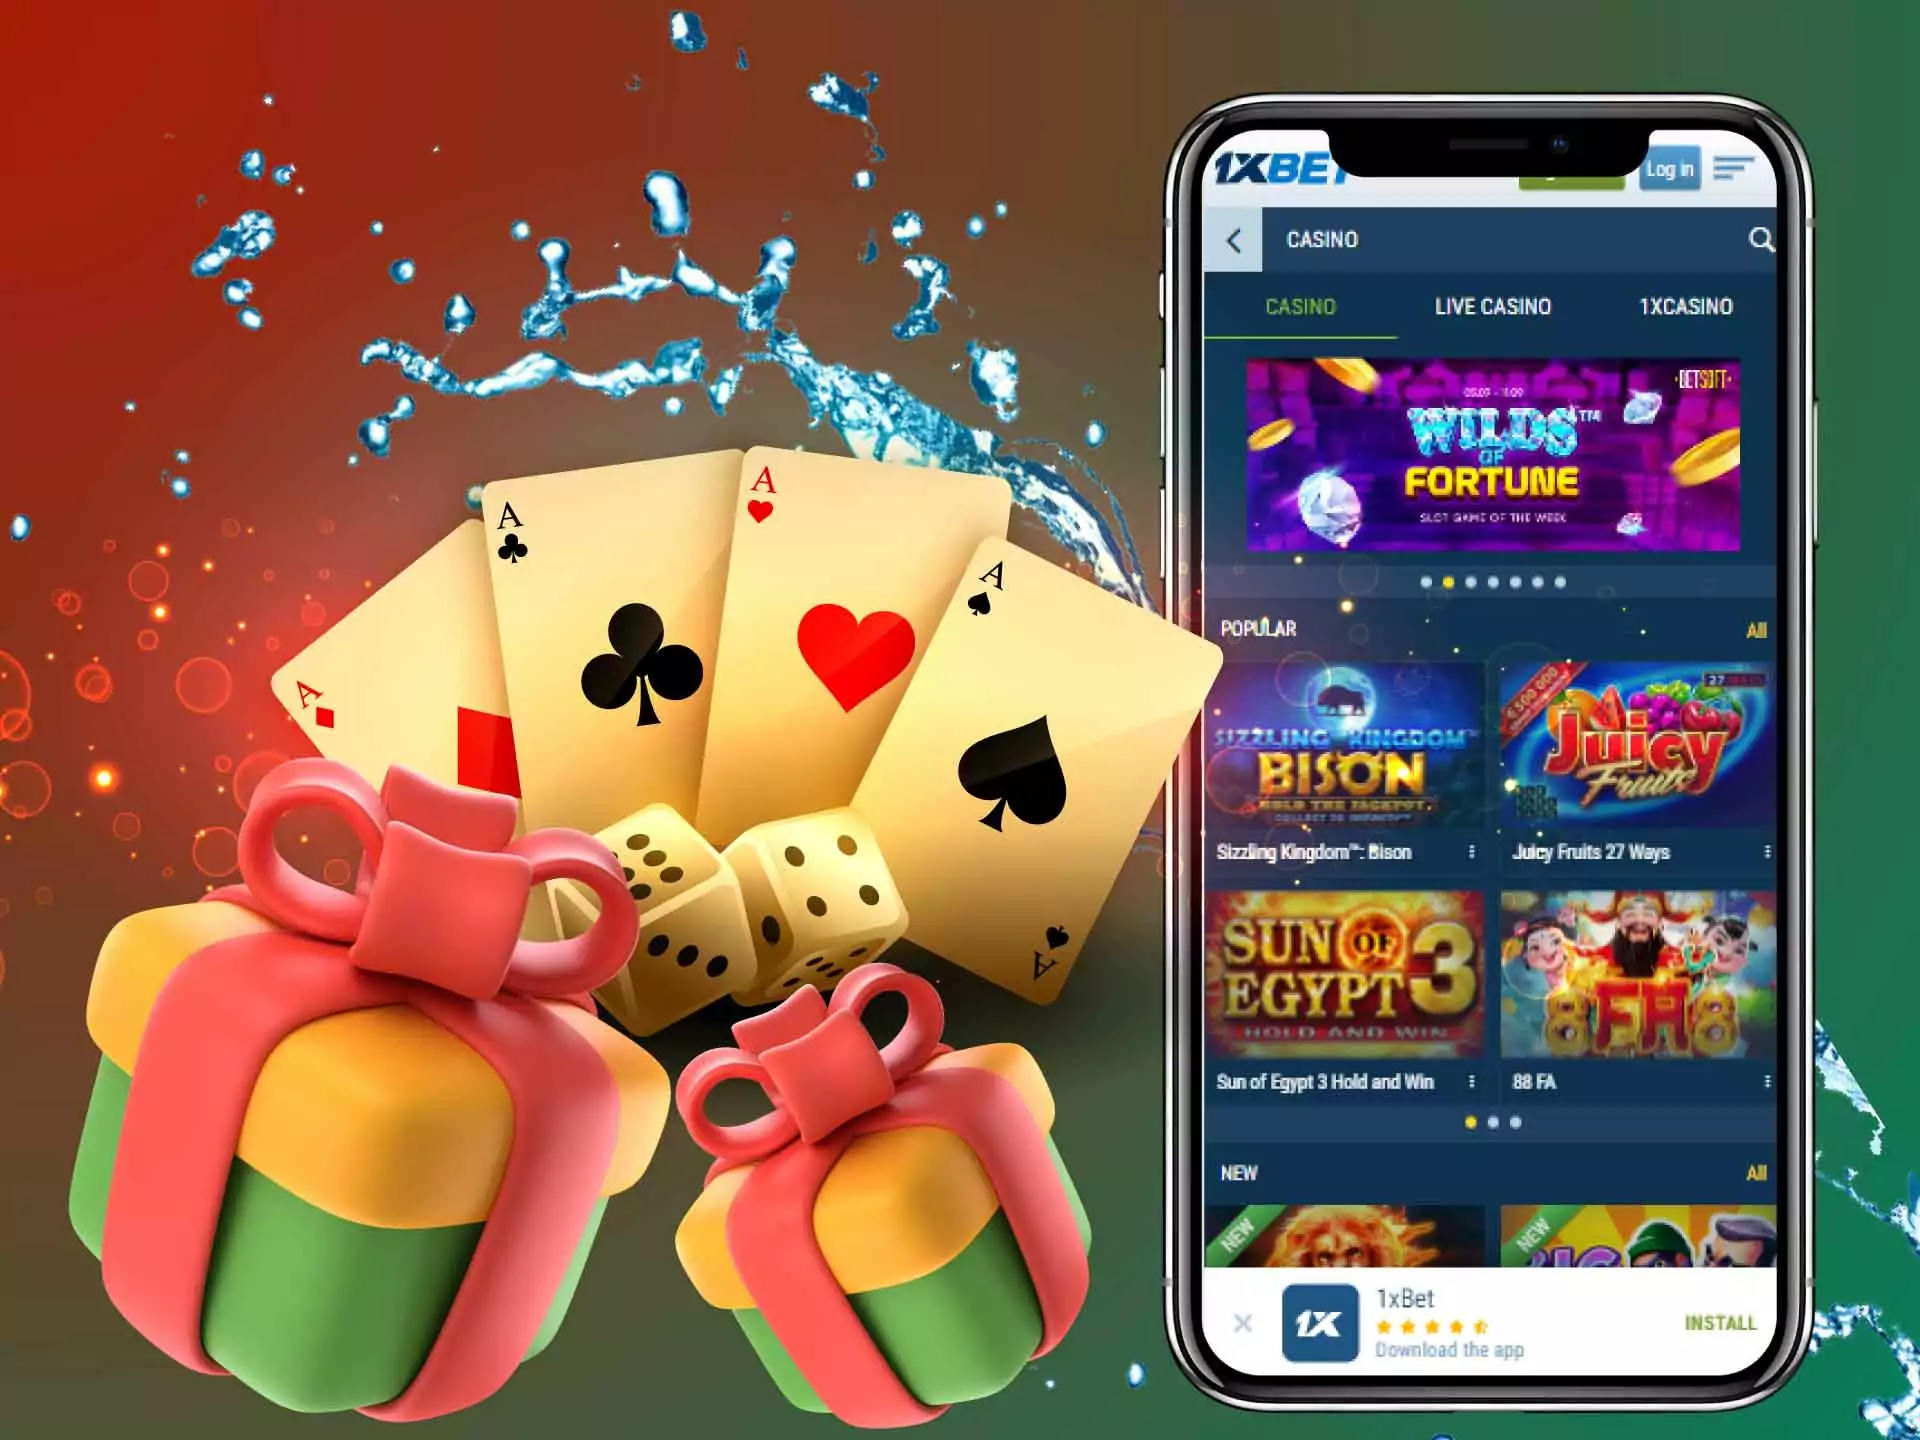 You can get up to 140,000 BDT for casino after the first deposit.